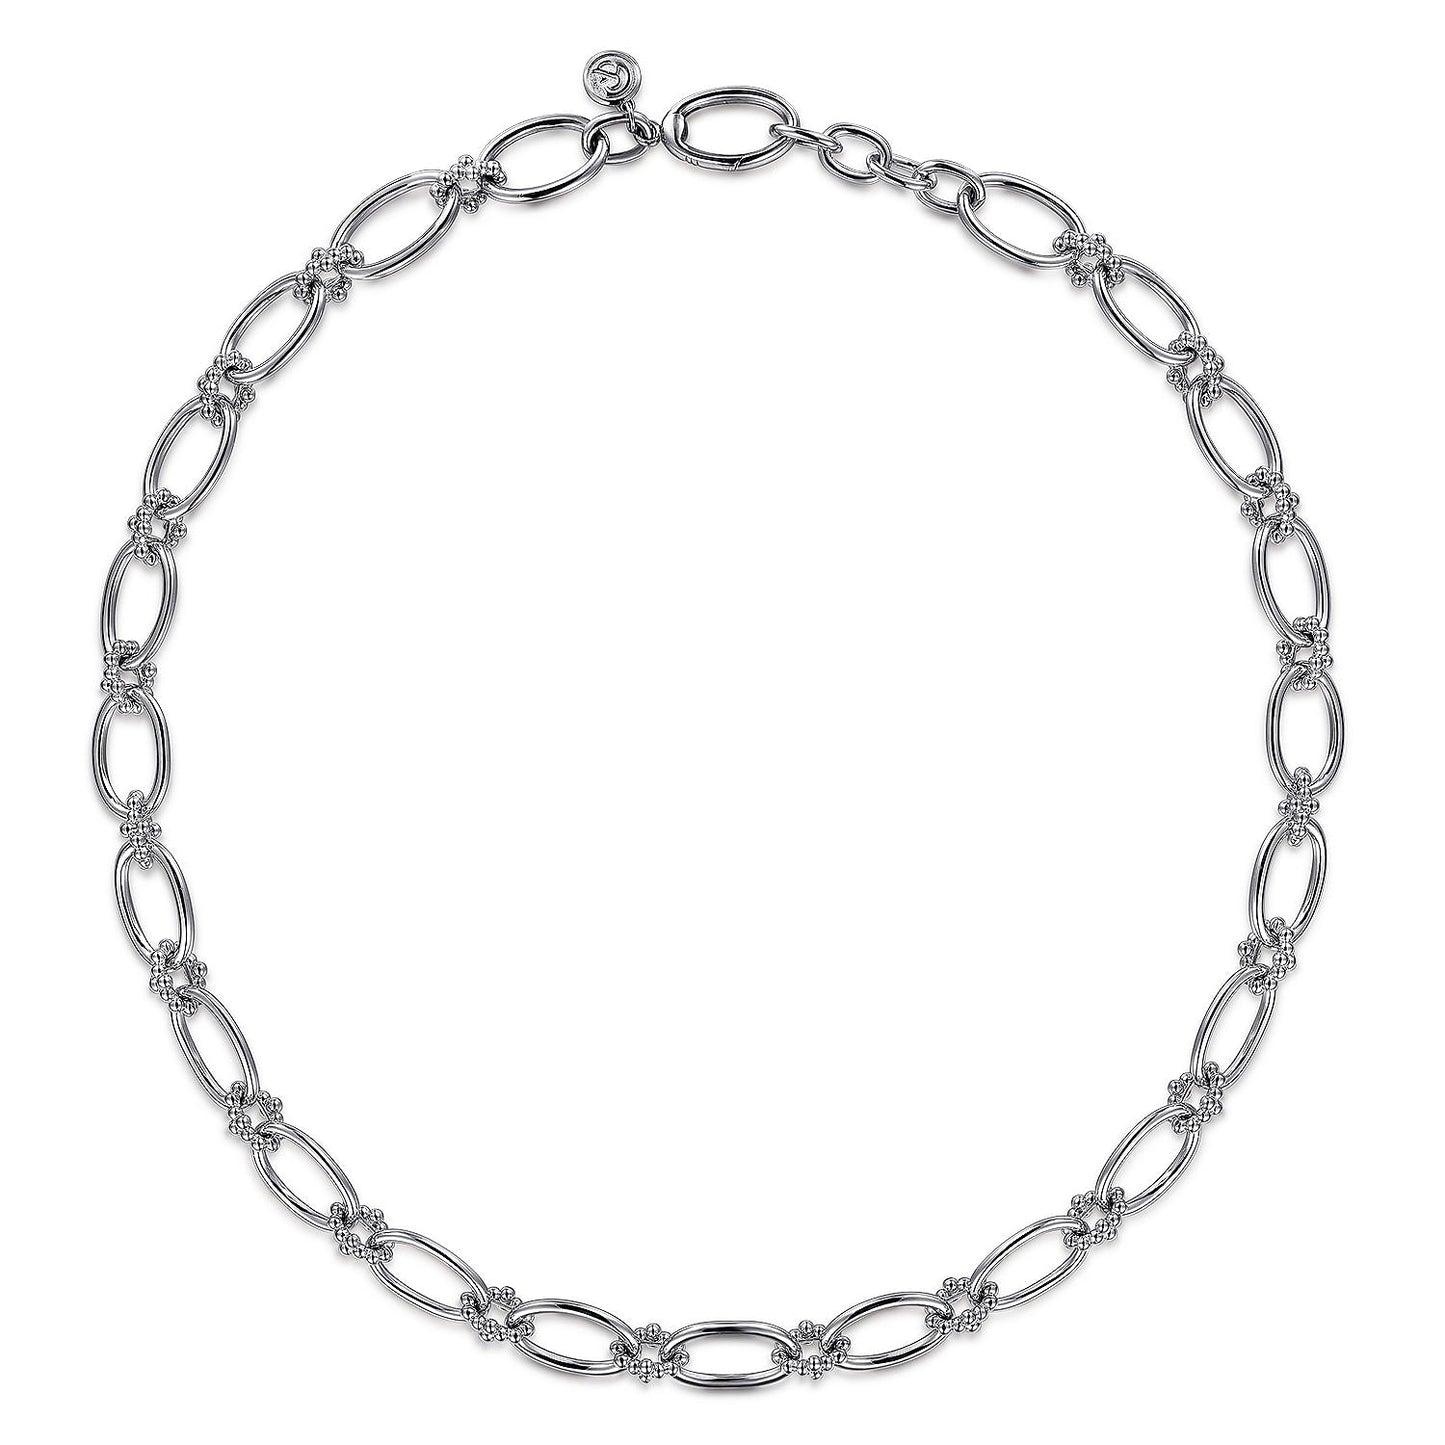 Sterling Silver Oval Link Chain Necklace with Bujukan Connectors - Warwick Jewelers